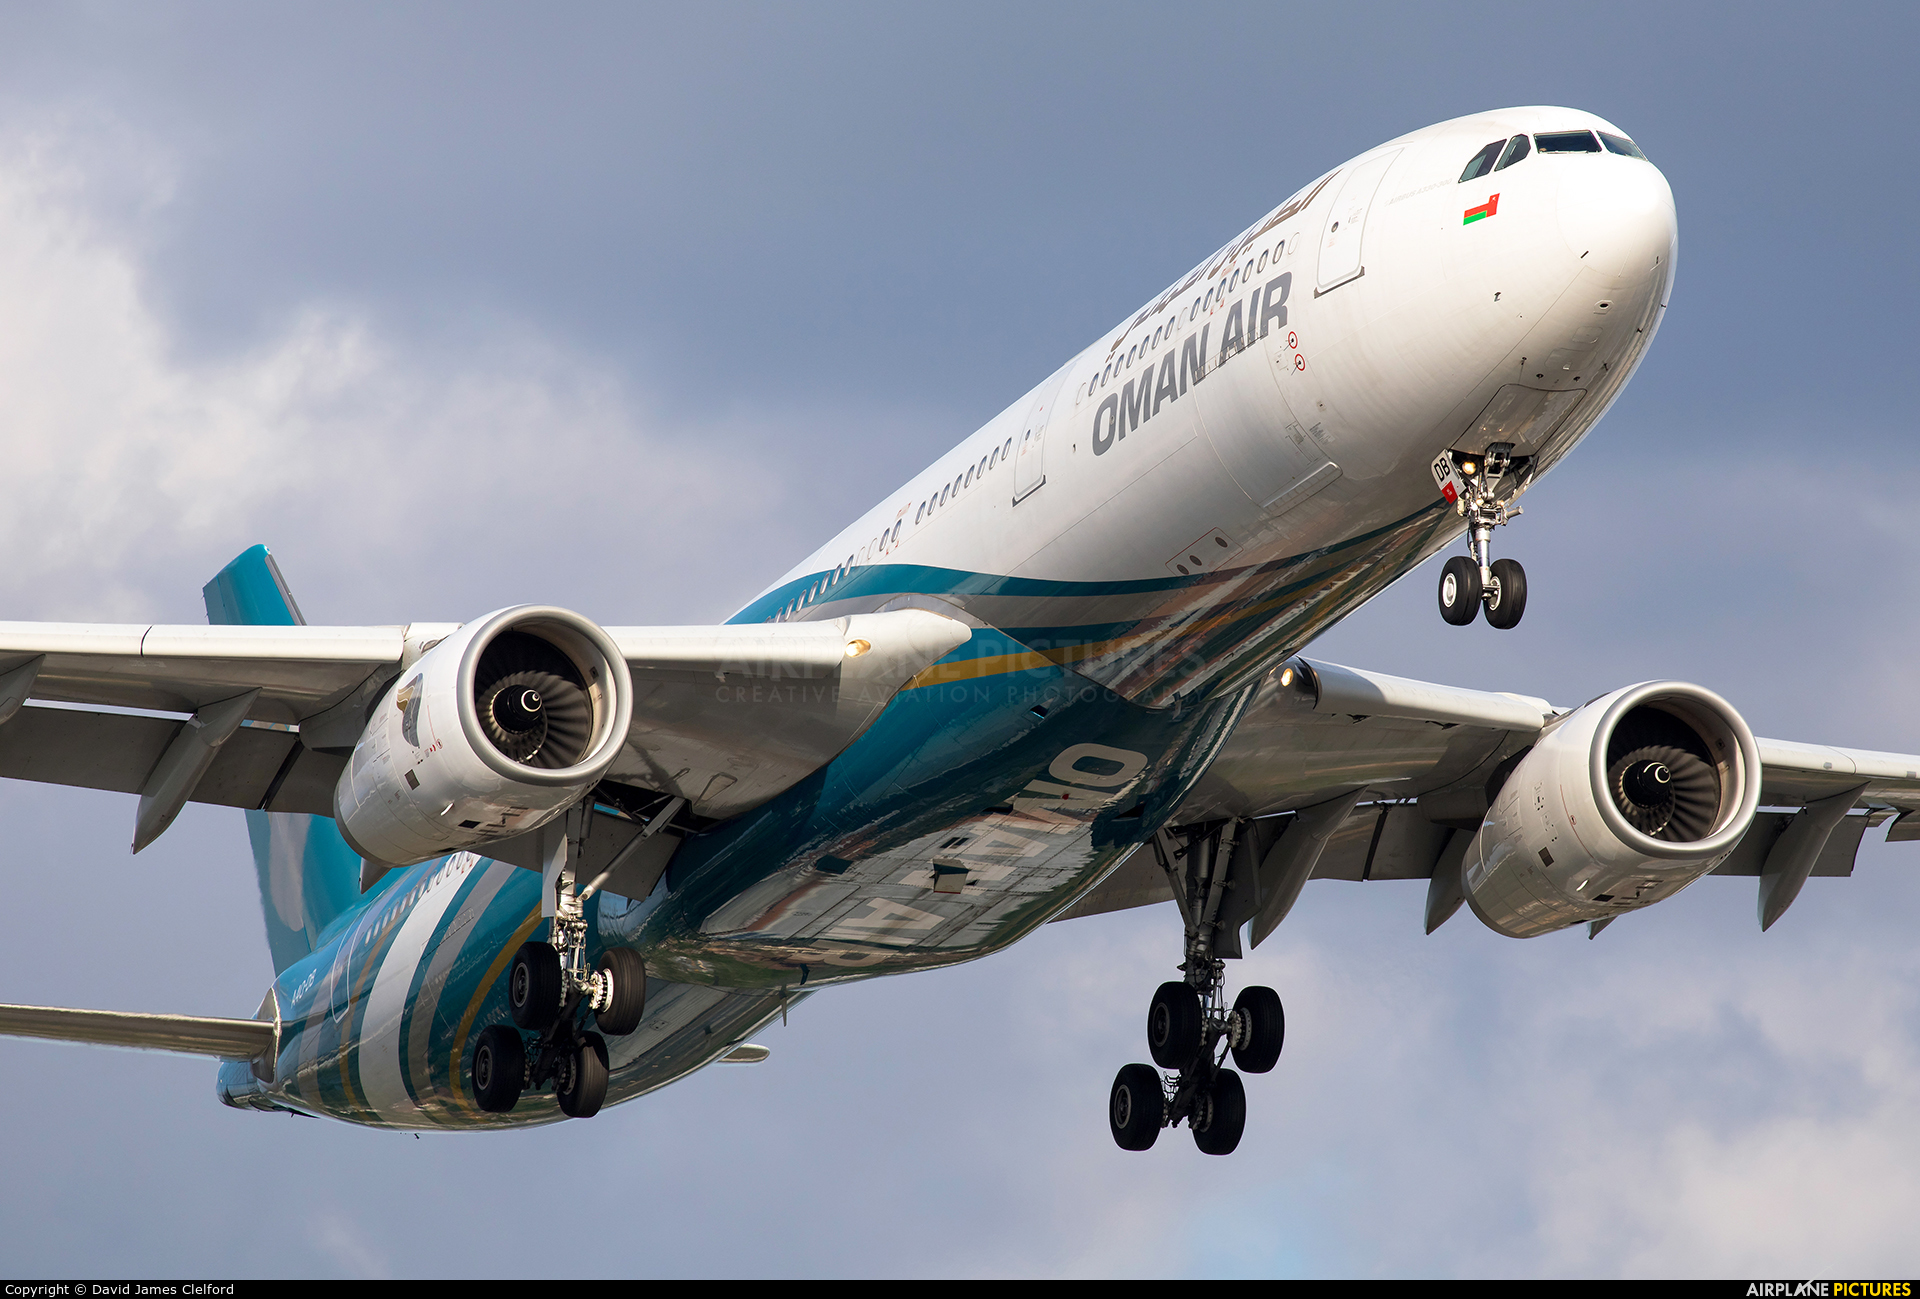 Oman Air operates cargoonly flights for Ministry of Health Times of Oman